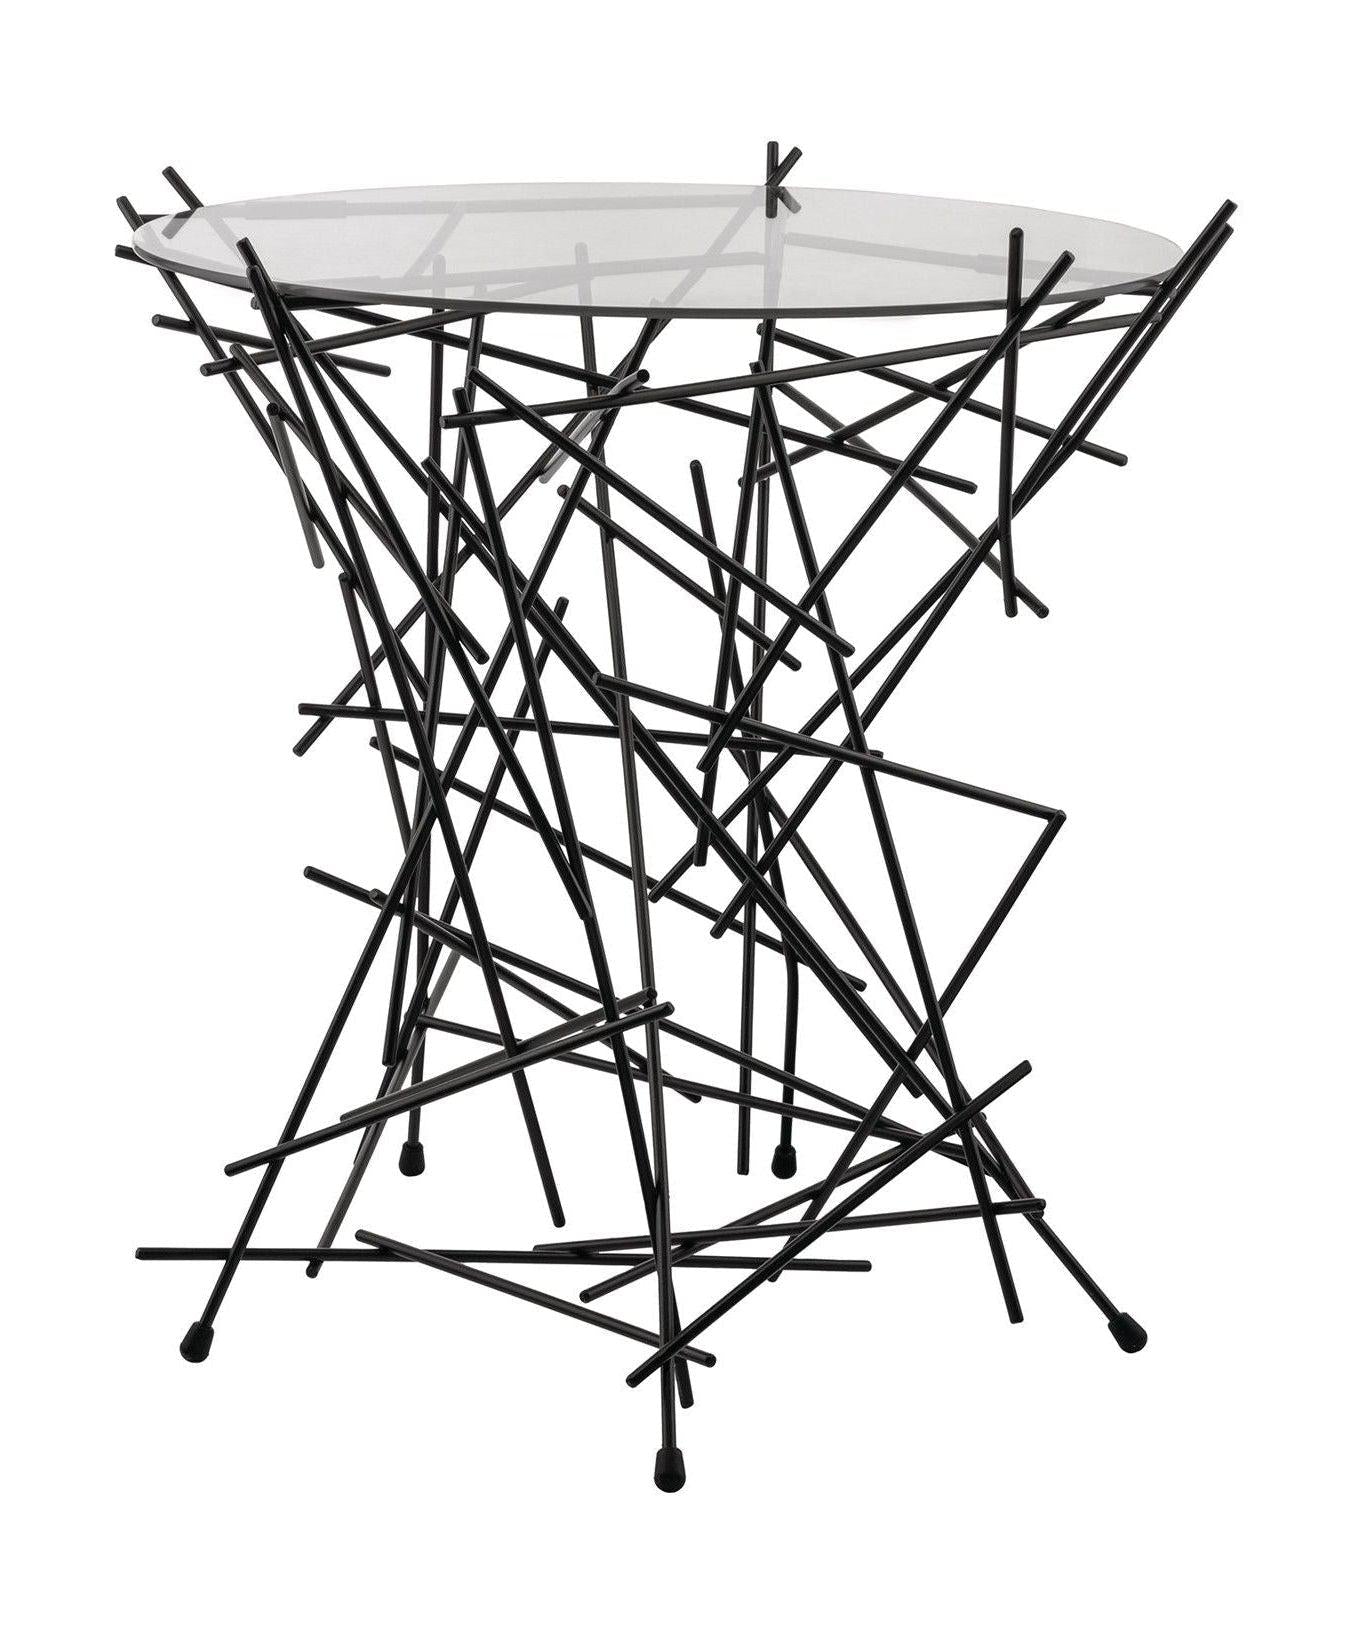 Alessi Blow Up Table